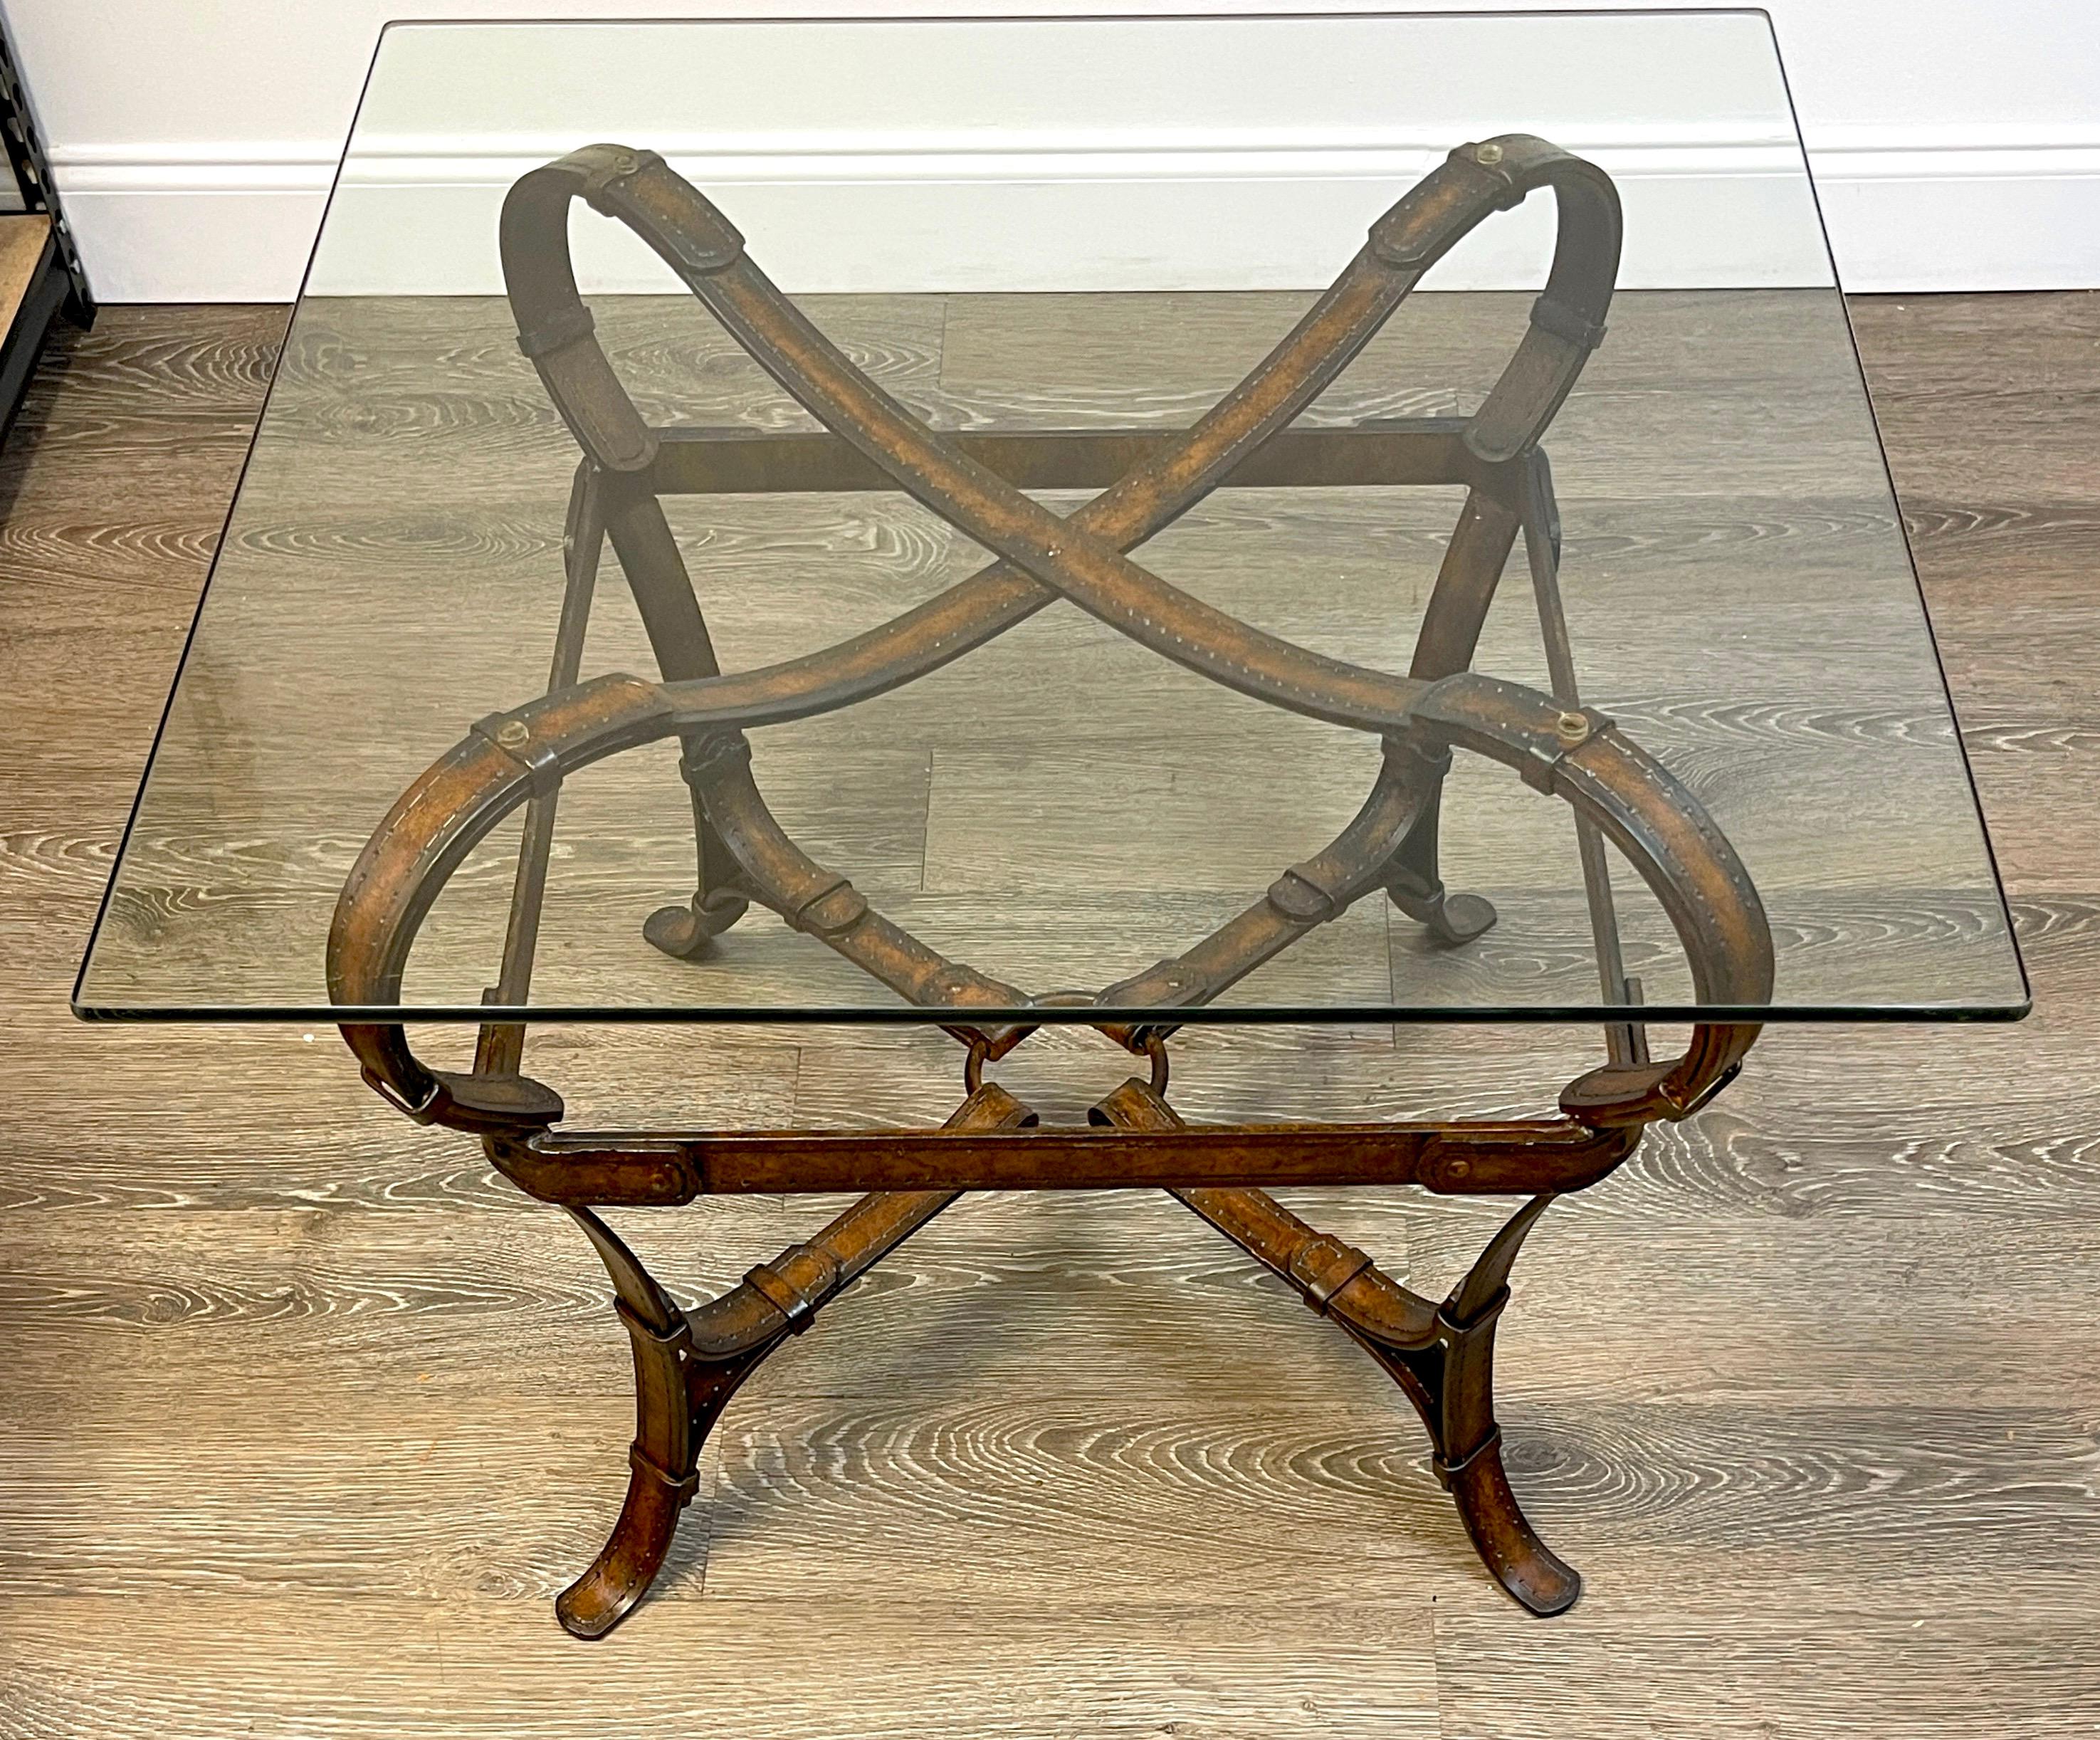 Hermes style Equestrian sculptural forged & polychromed iron side table.
France, circa 1980s.

A rare and unique modern side table in the style of Hermes. Crafted of polychromed forged iron base of sculptural leather straps and horse bits, with